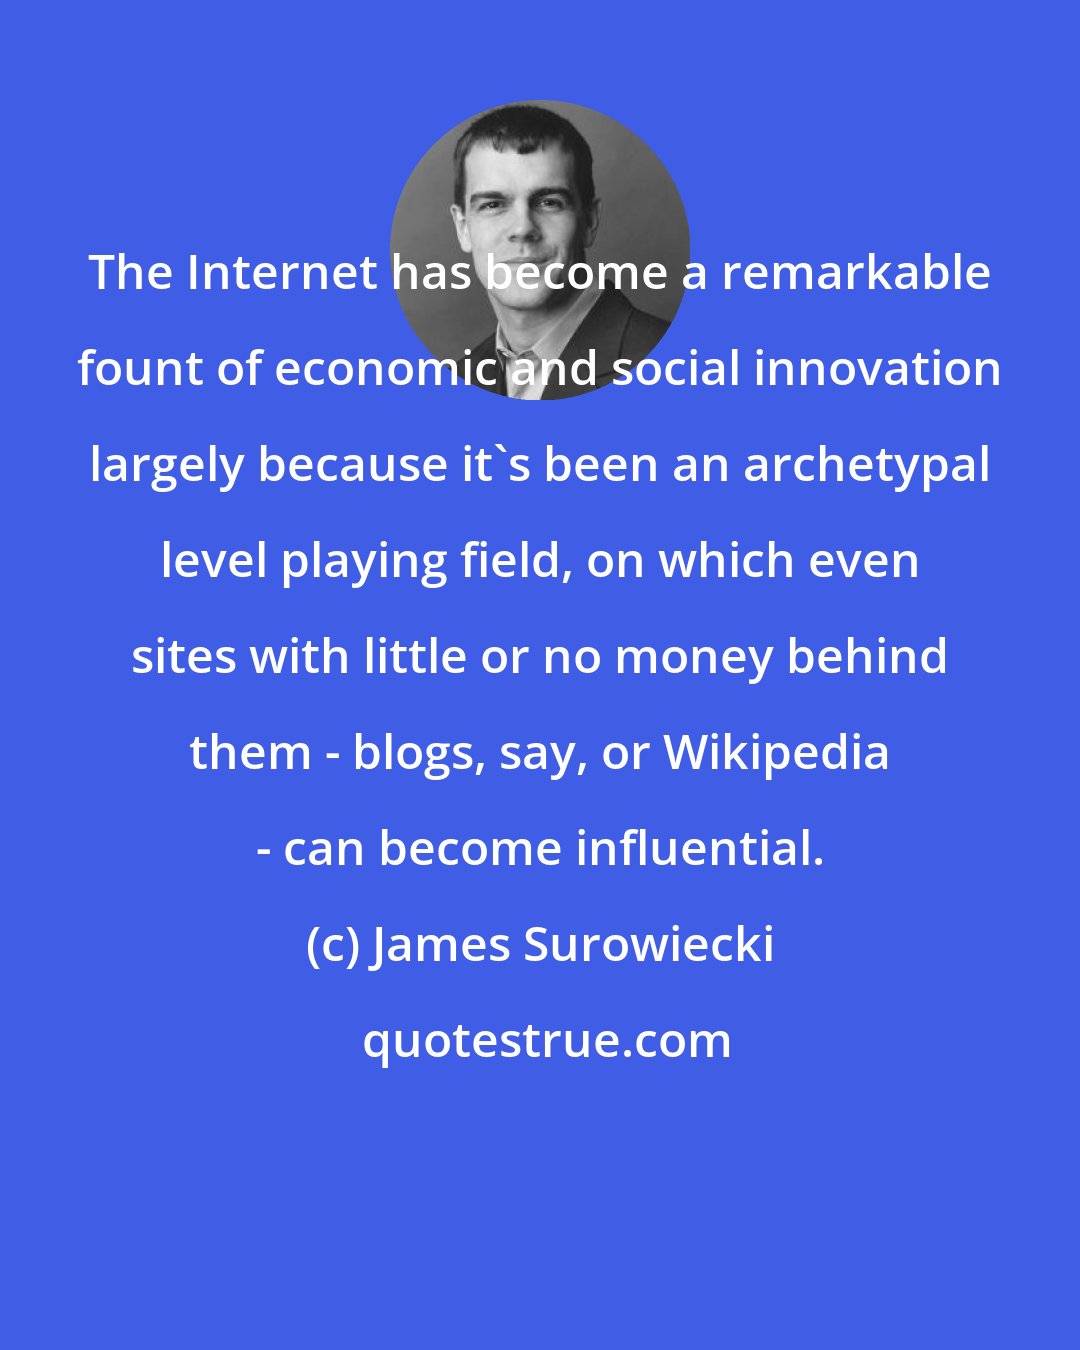 James Surowiecki: The Internet has become a remarkable fount of economic and social innovation largely because it's been an archetypal level playing field, on which even sites with little or no money behind them - blogs, say, or Wikipedia - can become influential.